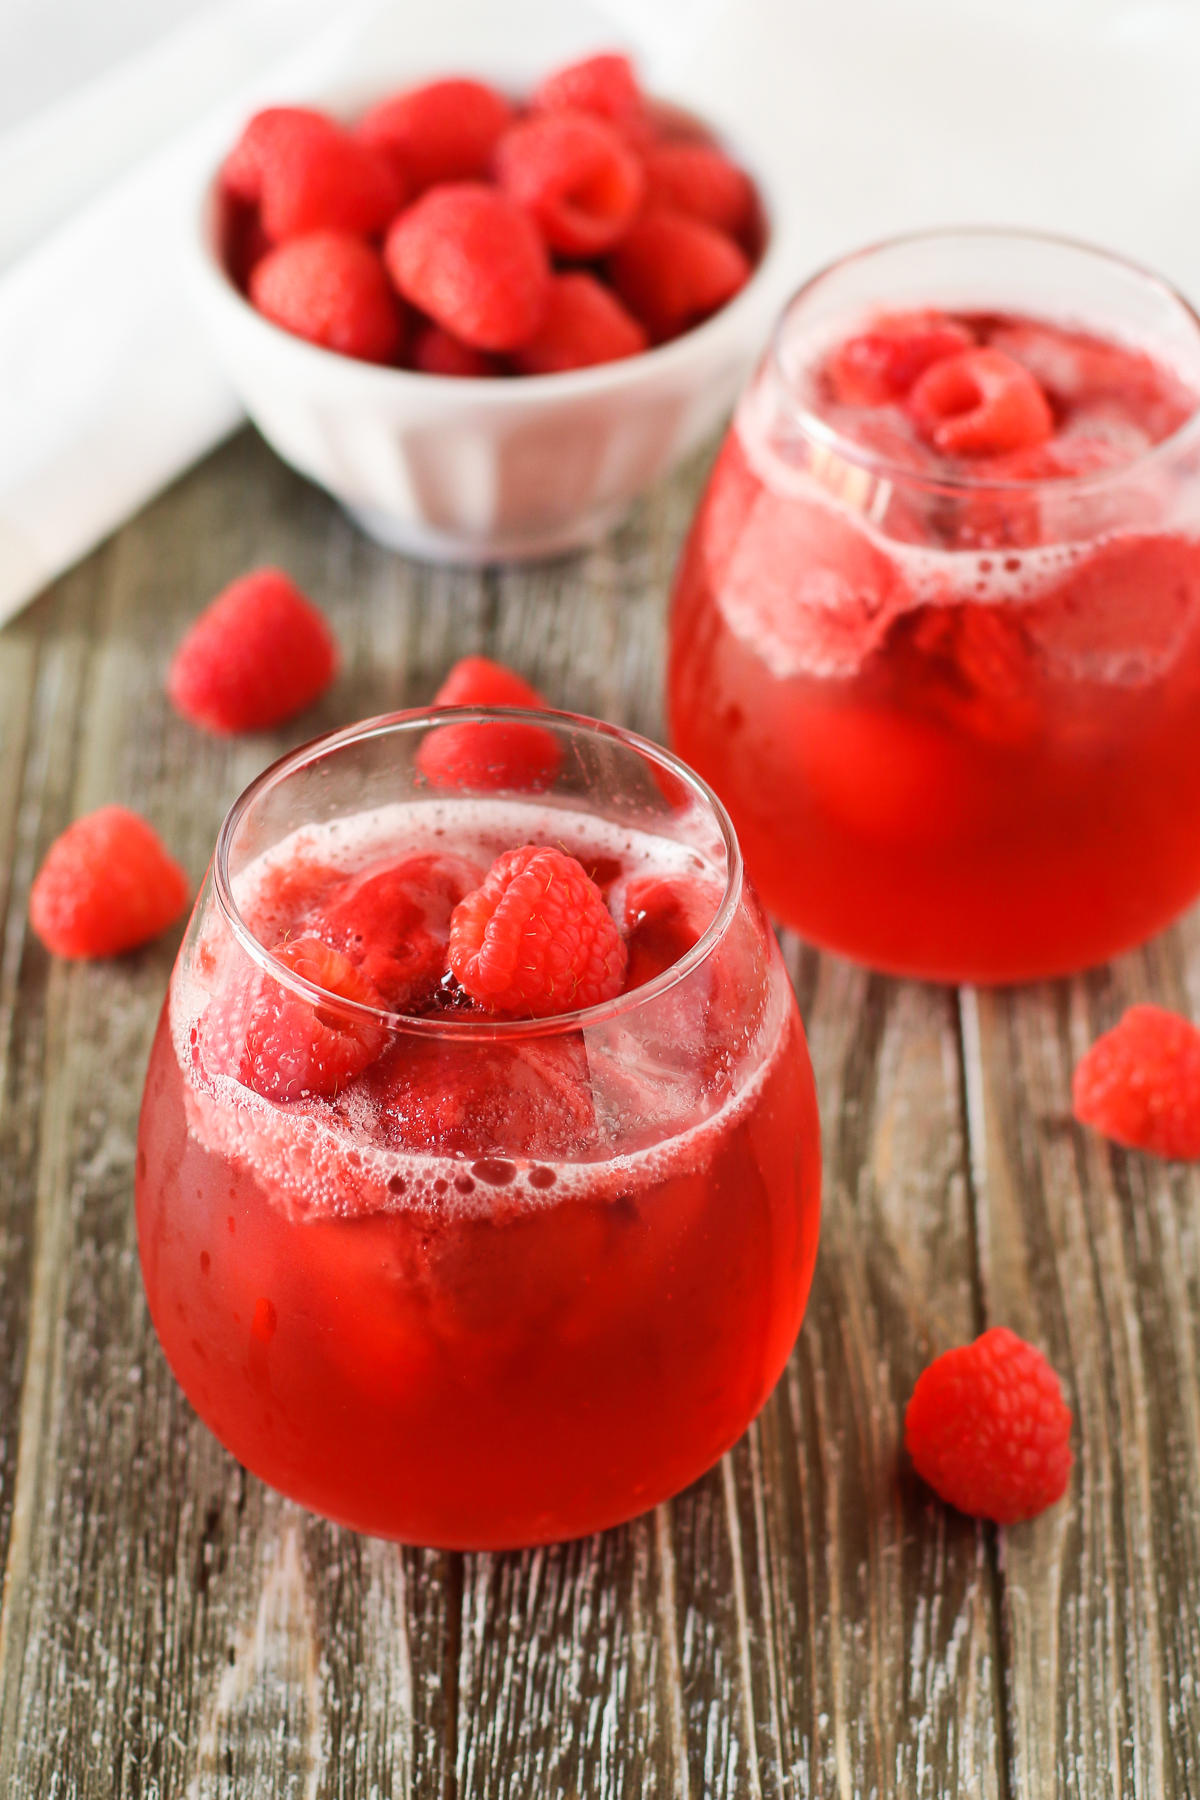 Raspberry Sorbet Rosé Floats. Raspberry sorbet and sparkling rosé wine, topped with fresh raspberries. A berry sweet drink!